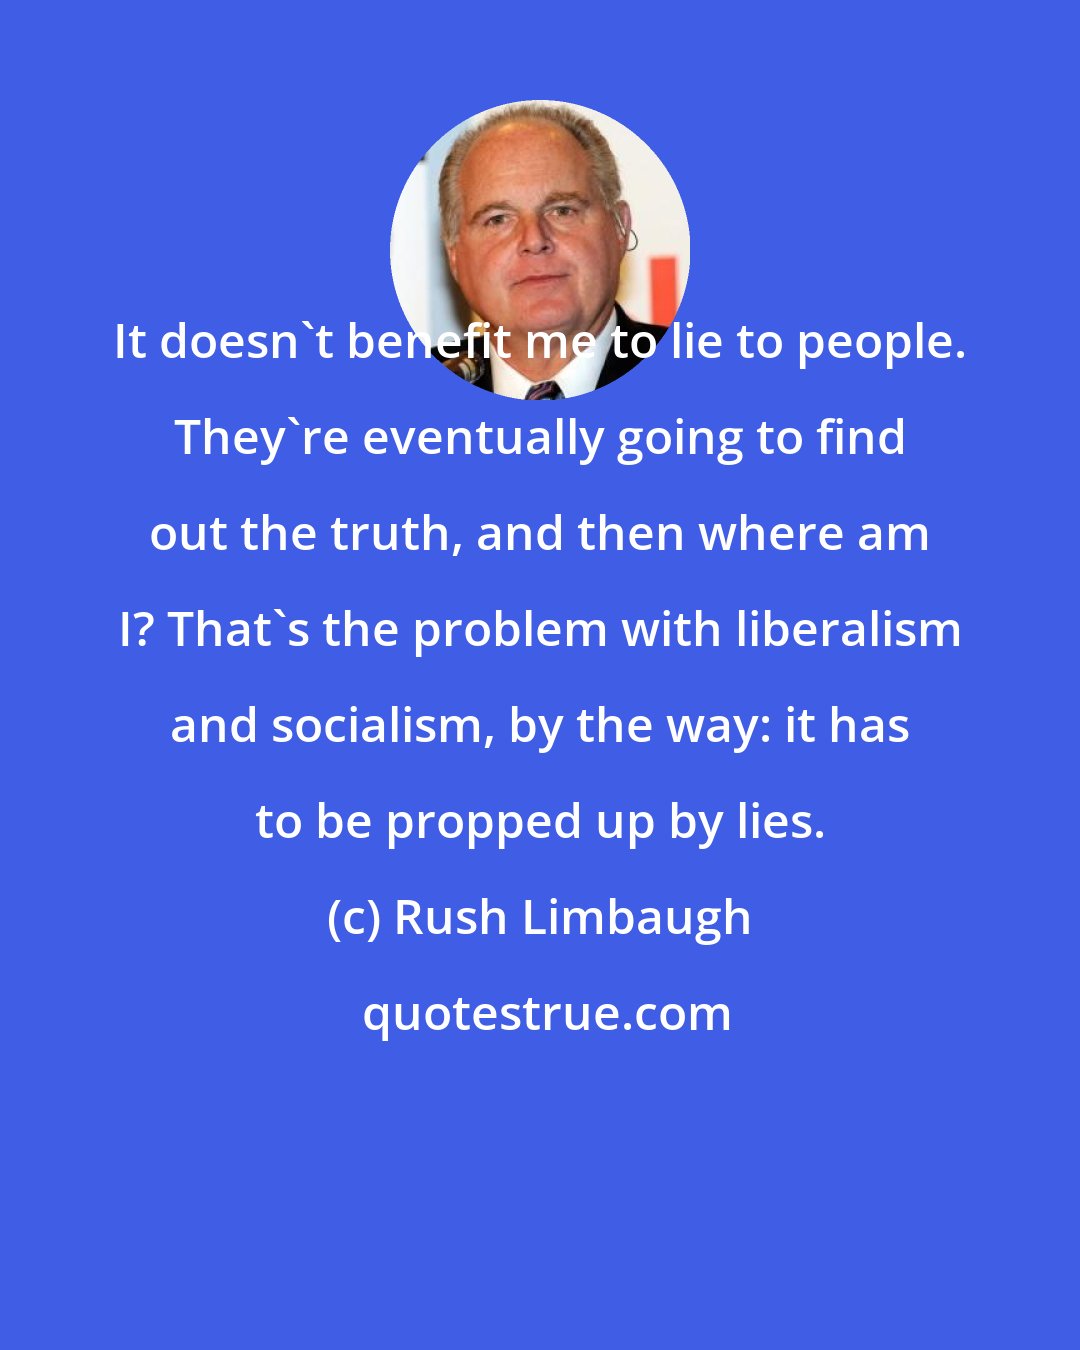 Rush Limbaugh: It doesn't benefit me to lie to people. They're eventually going to find out the truth, and then where am I? That's the problem with liberalism and socialism, by the way: it has to be propped up by lies.